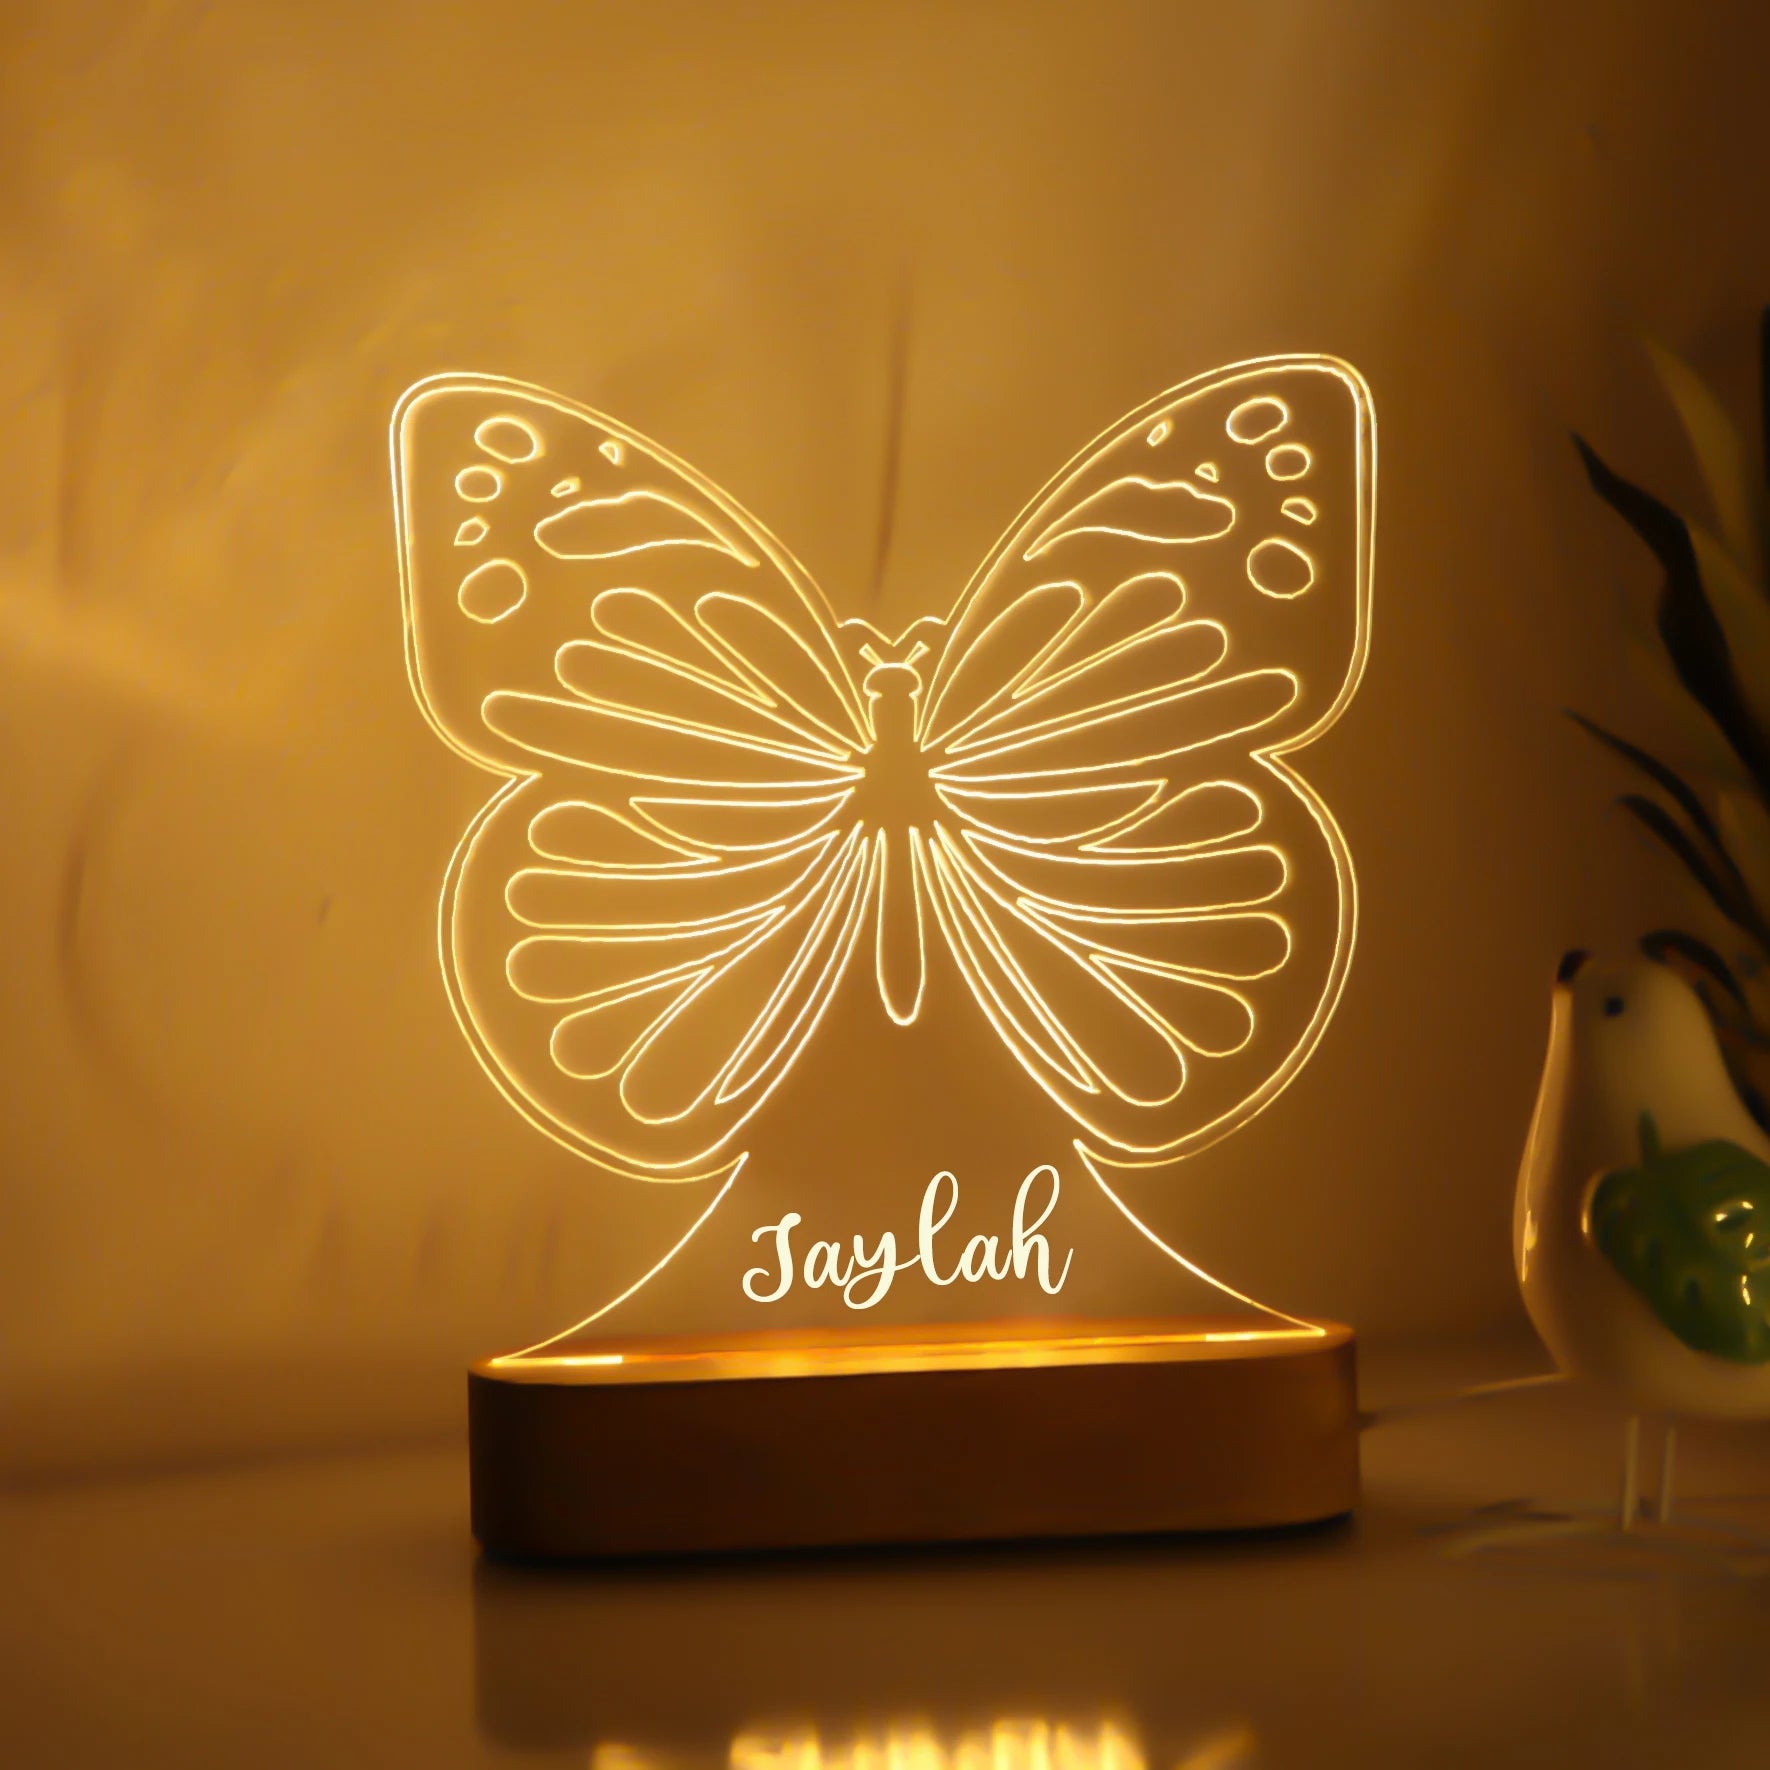 Personalized USB Night Light for Babies and Kids - Custom Name Lamp for Nursery, Newborn Bedroom, Home Decor, Ideal Birthday